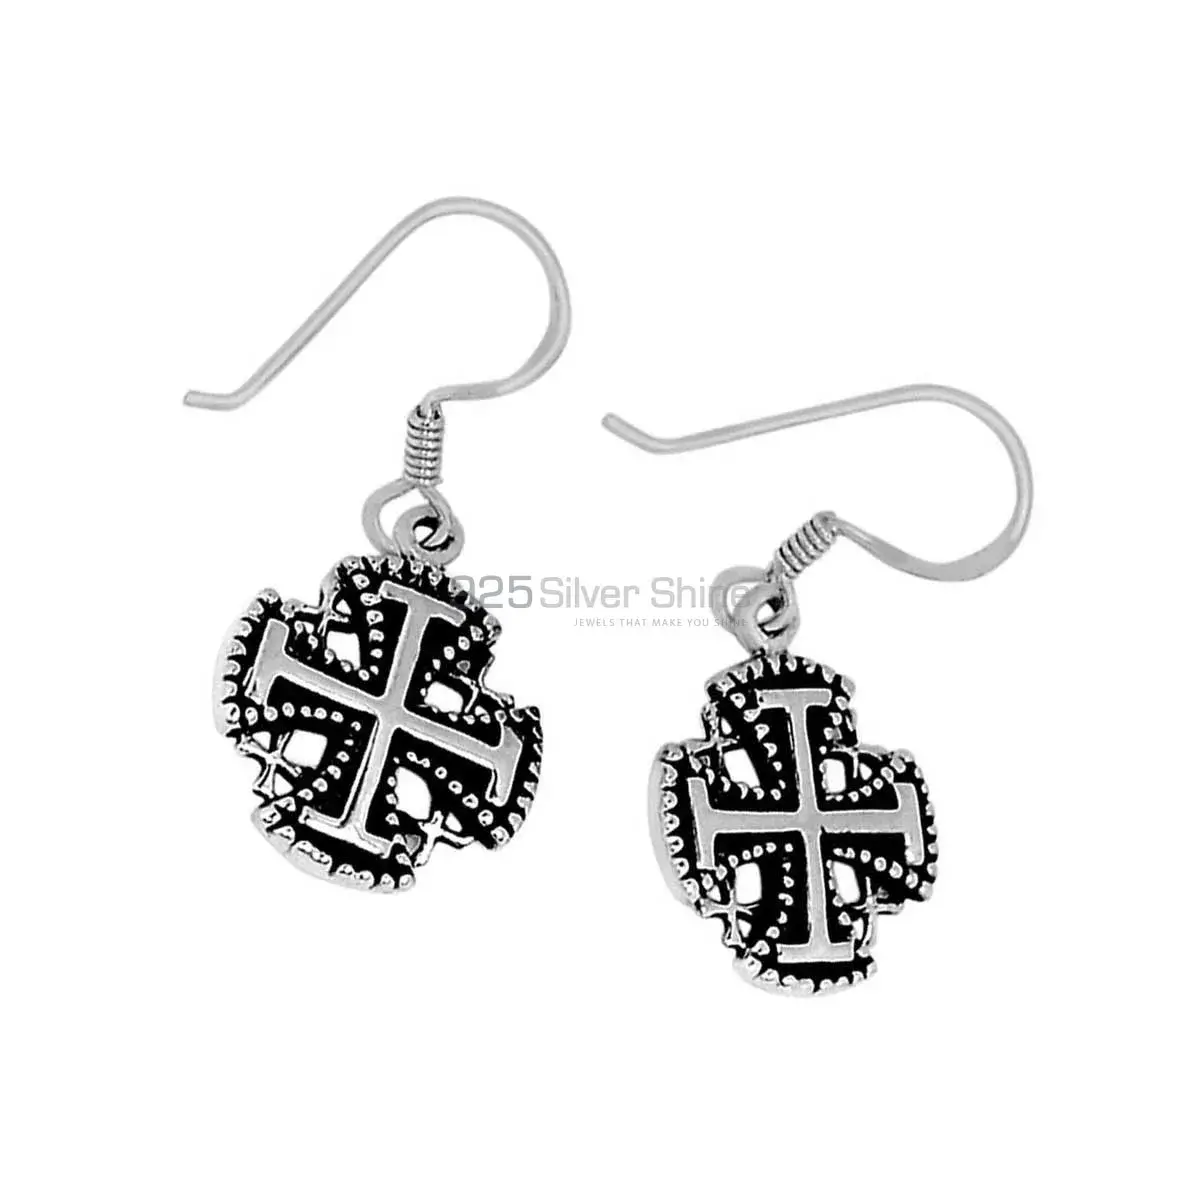 Affordable 925 Sterling Silver Handmade Earrings Suppliers 925SE2878_3